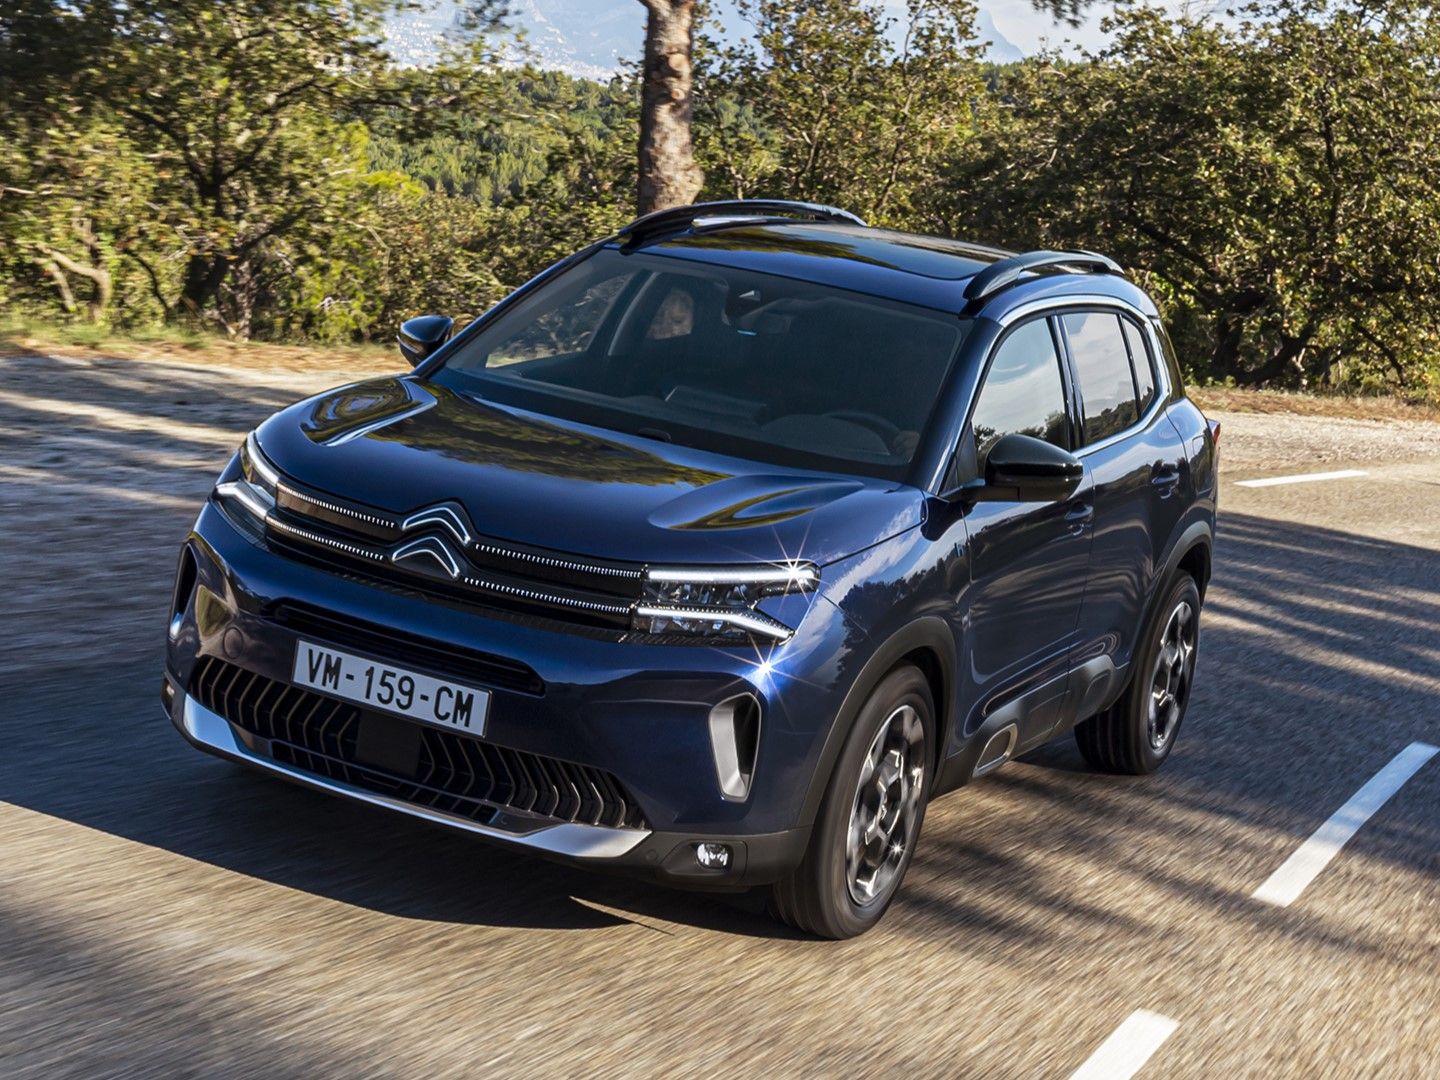 Facelifted Citroen C5 Aircross To Launch On September 7 - ZigWheels